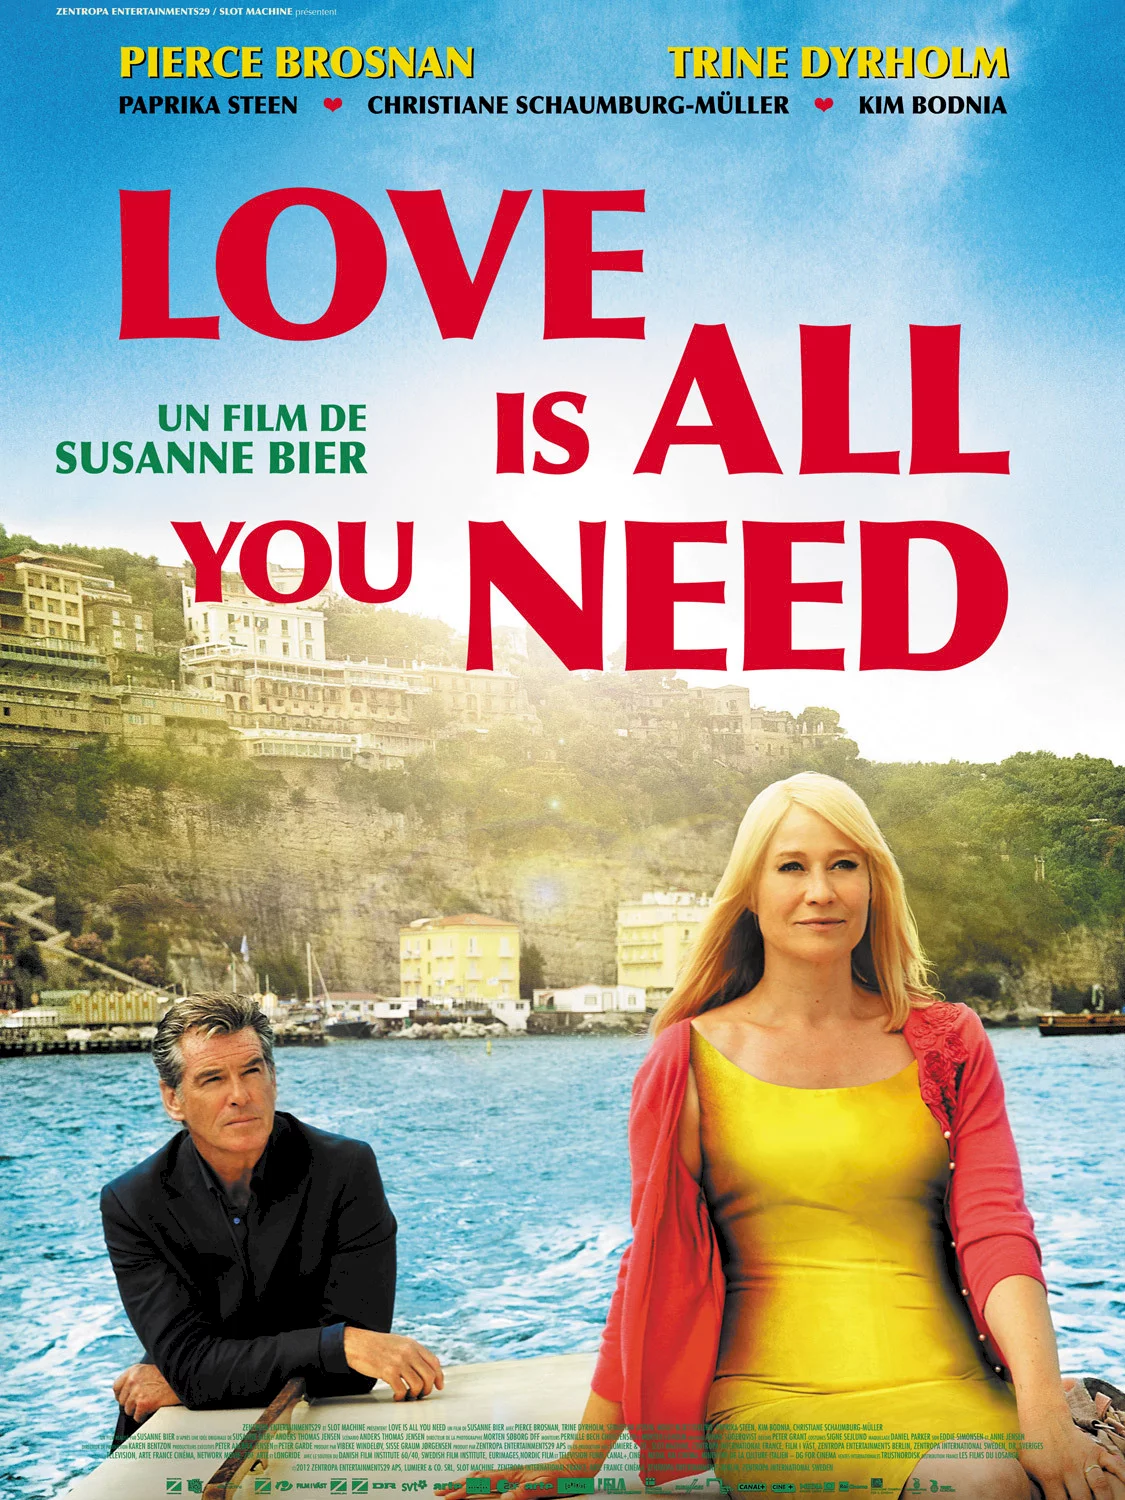 Photo du film : All you need is love